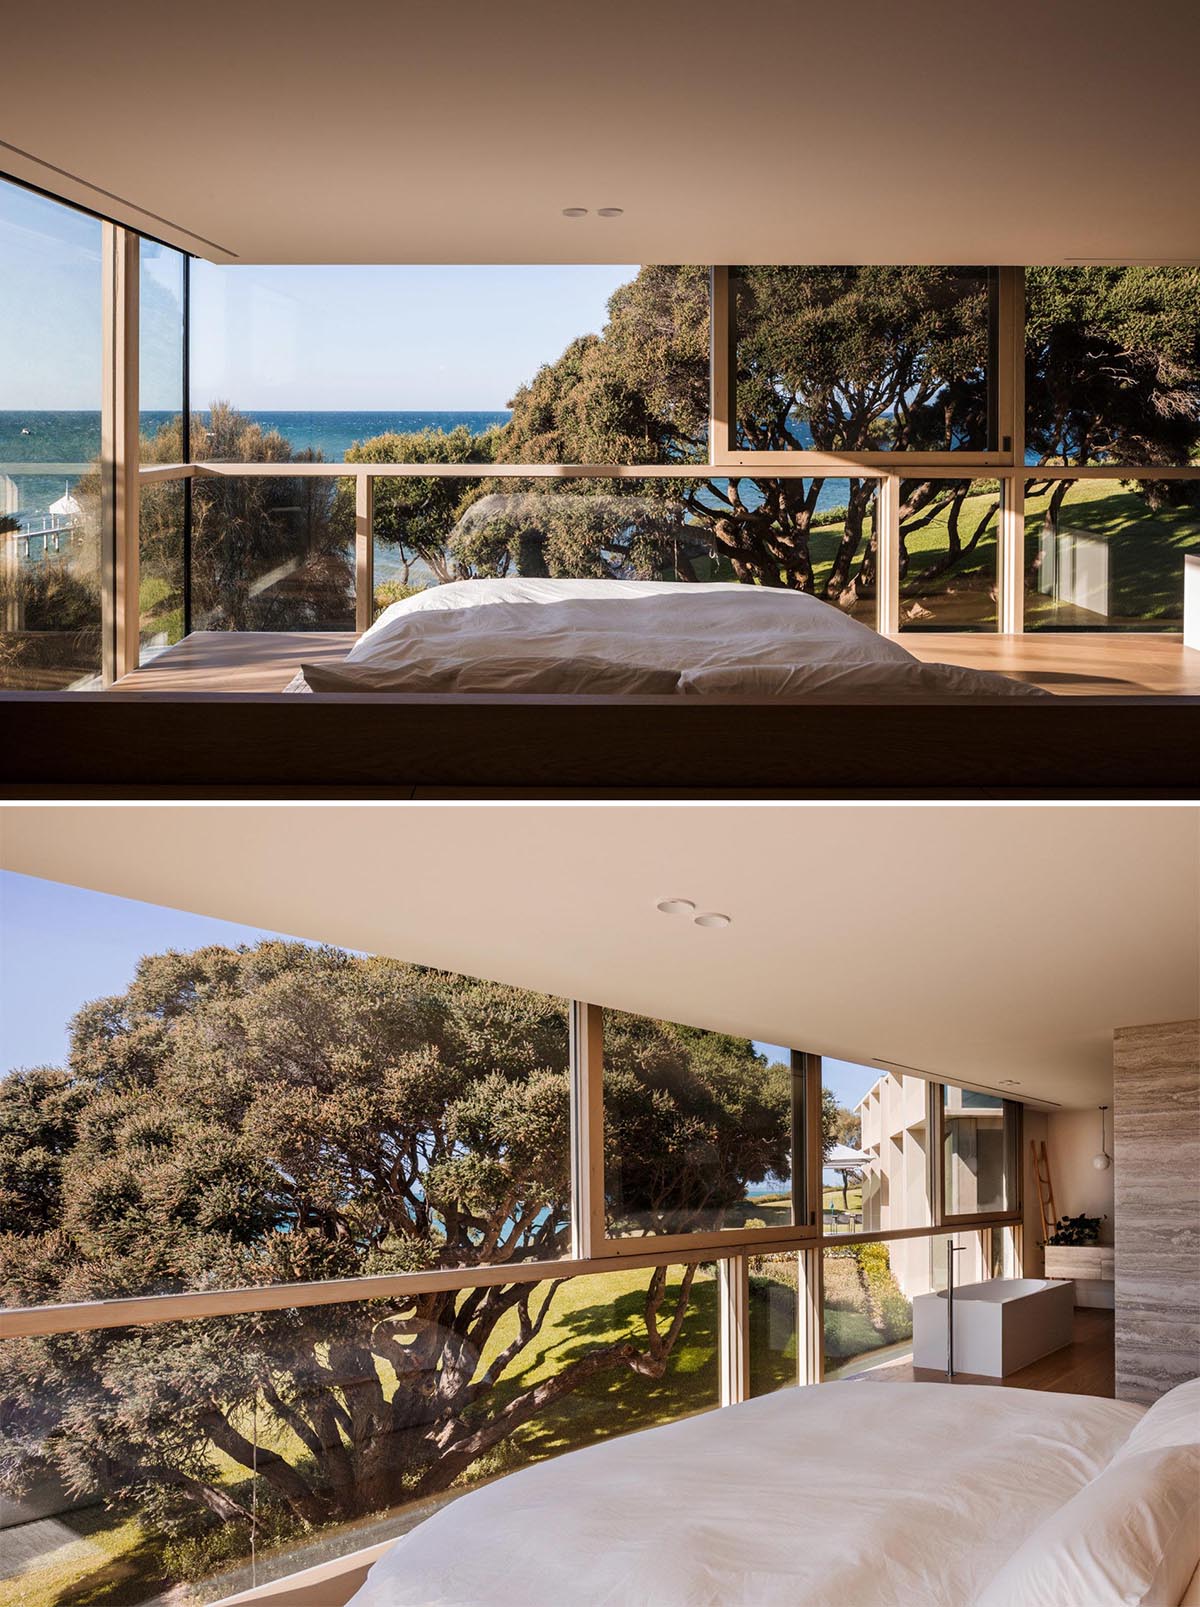 In this modern bedroom, sliding windows that match the level of the home, open up to provide unobstructed views.